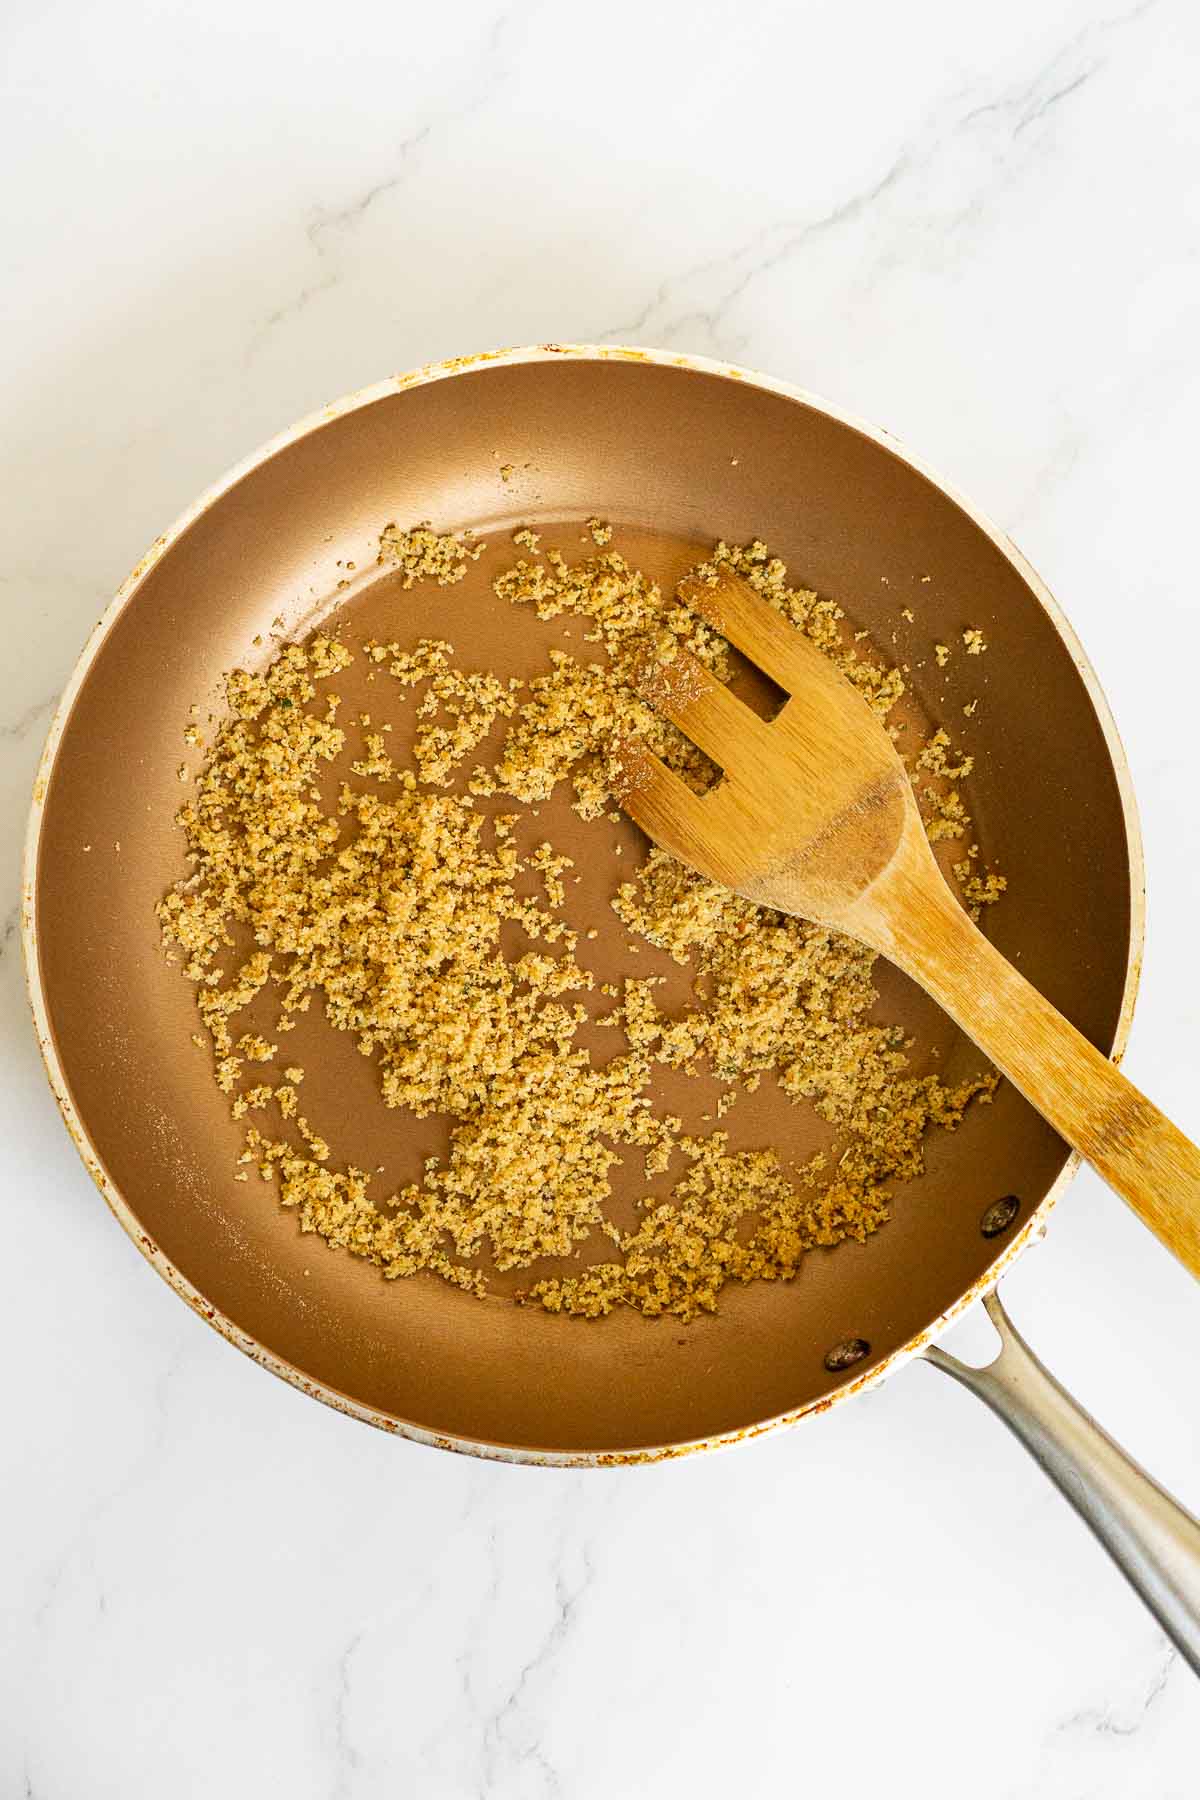 Pan of toasted breadcrumbs